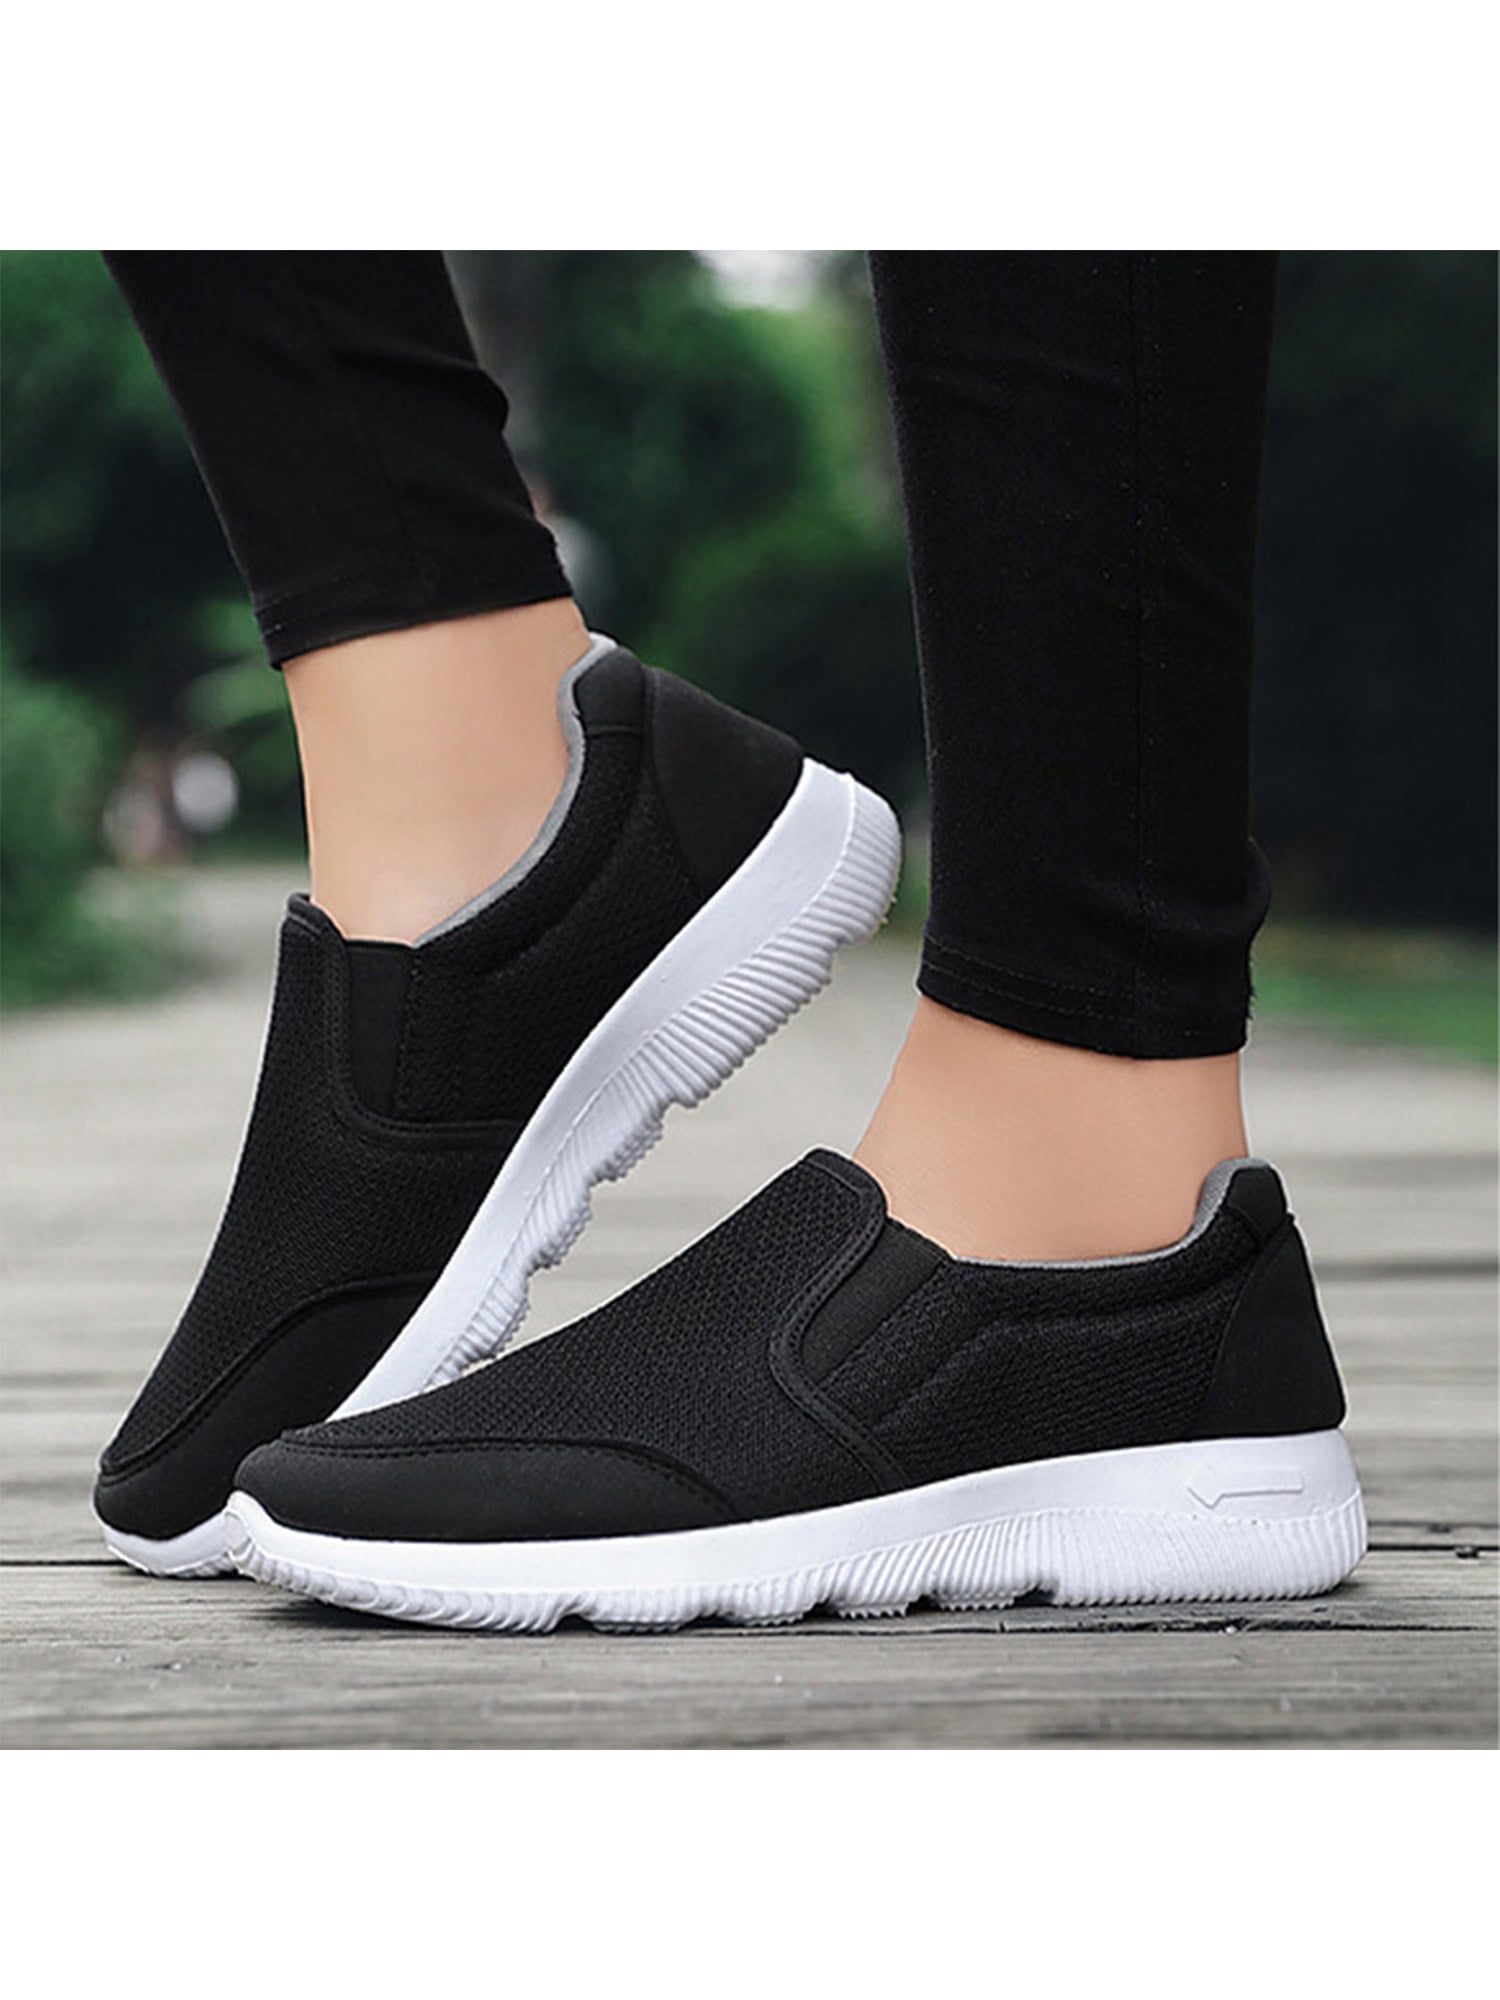 Flysocks Slip On Sneakers for Women-Fashion Sneakers Walking Shoes Non Slip Lightweight Breathable Mesh Running Shoes Comfortable 